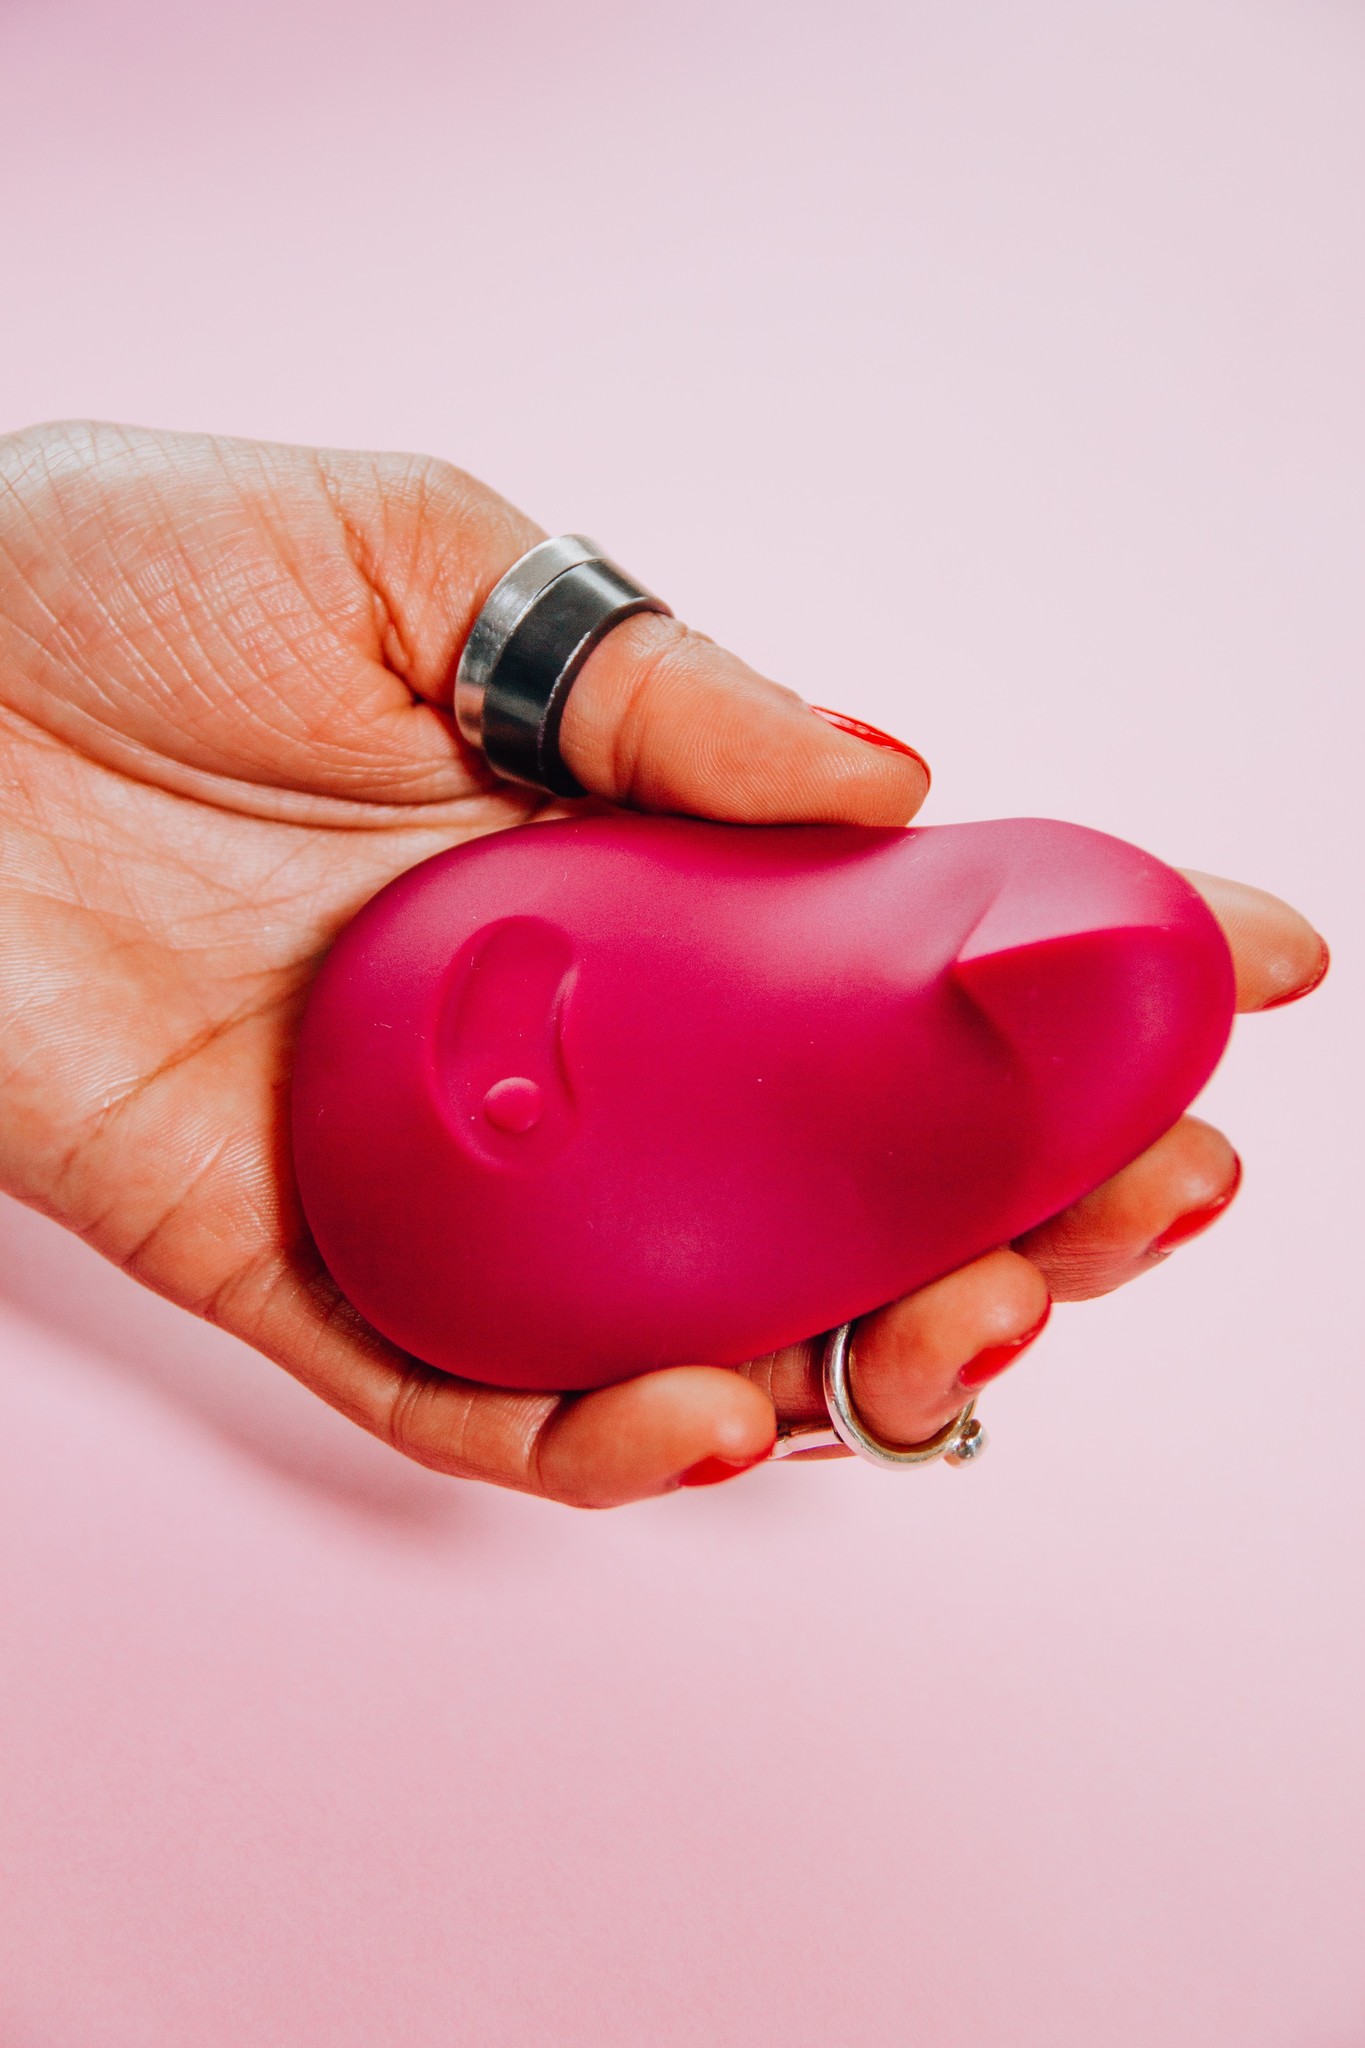 What You May Not Know About Vibrators